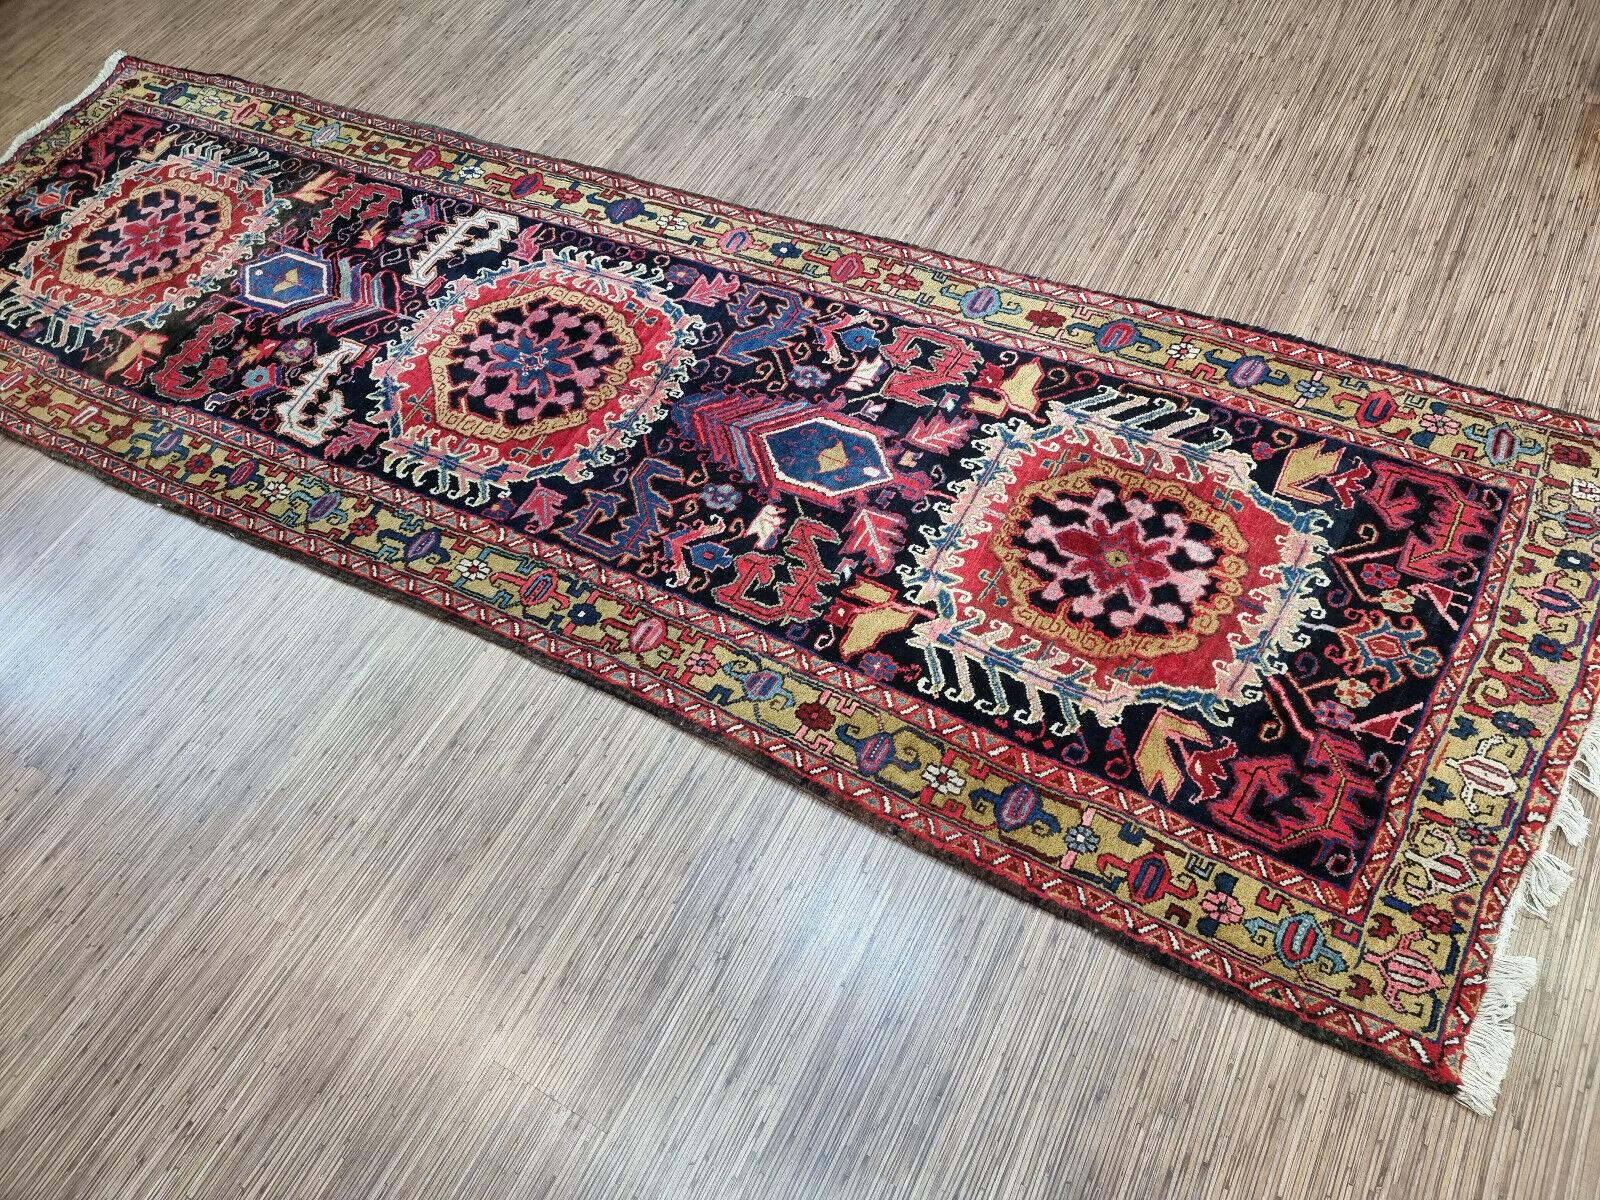 Handmade Antique Persian Style Heriz Runner Rug

Add a touch of history and artistry to your home with this handmade antique Persian style Heriz runner rug. This stunning piece measures 3.7’ x 12.1’ or 114cm x 370cm, making it a long and narrow rug